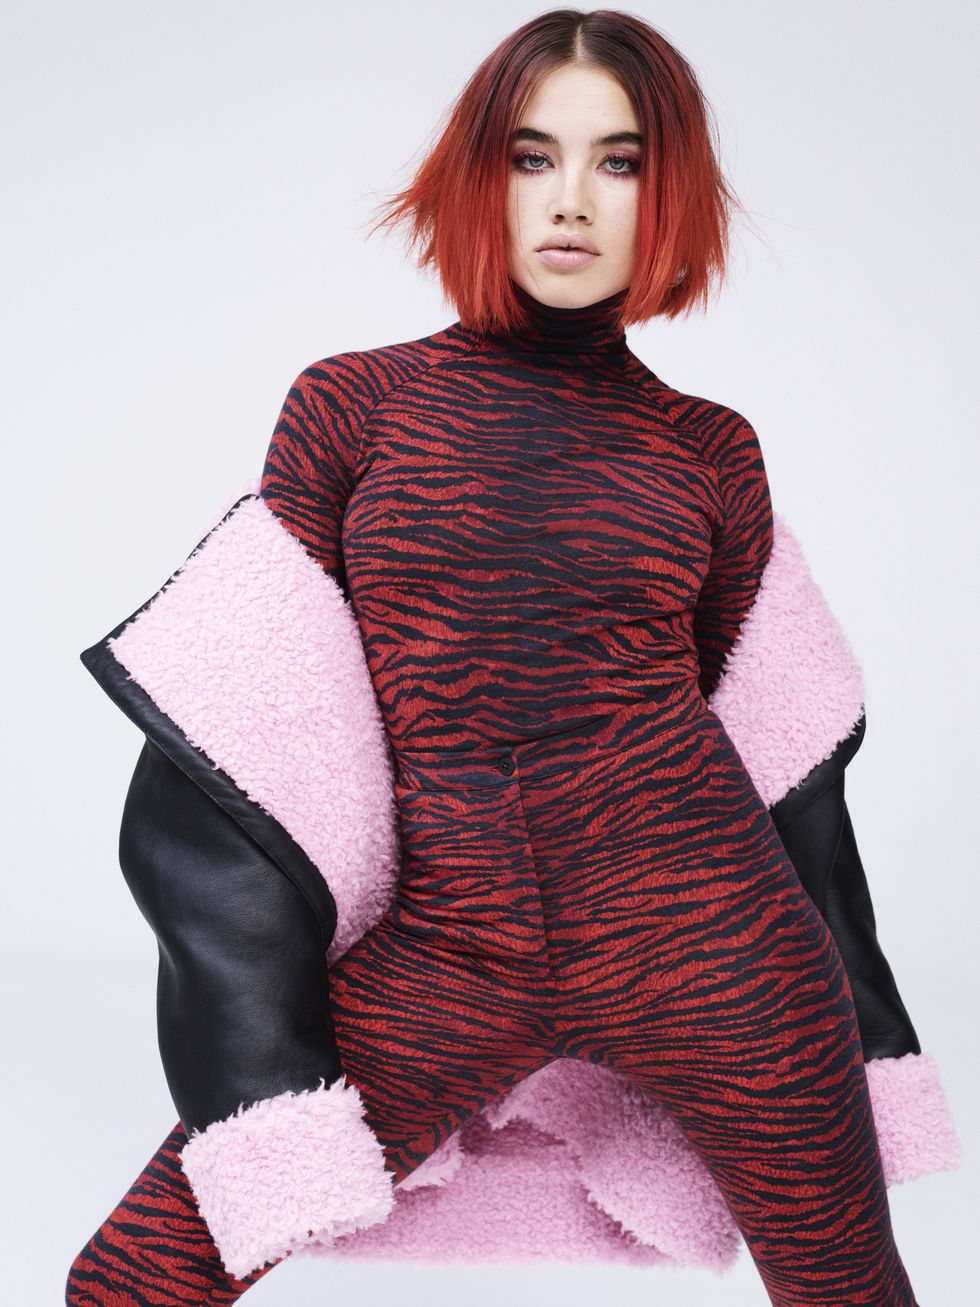 Lip, Sleeve, Shoulder, Red, Fashion model, Red hair, Fashion, Costume accessory, Model, Waist, 